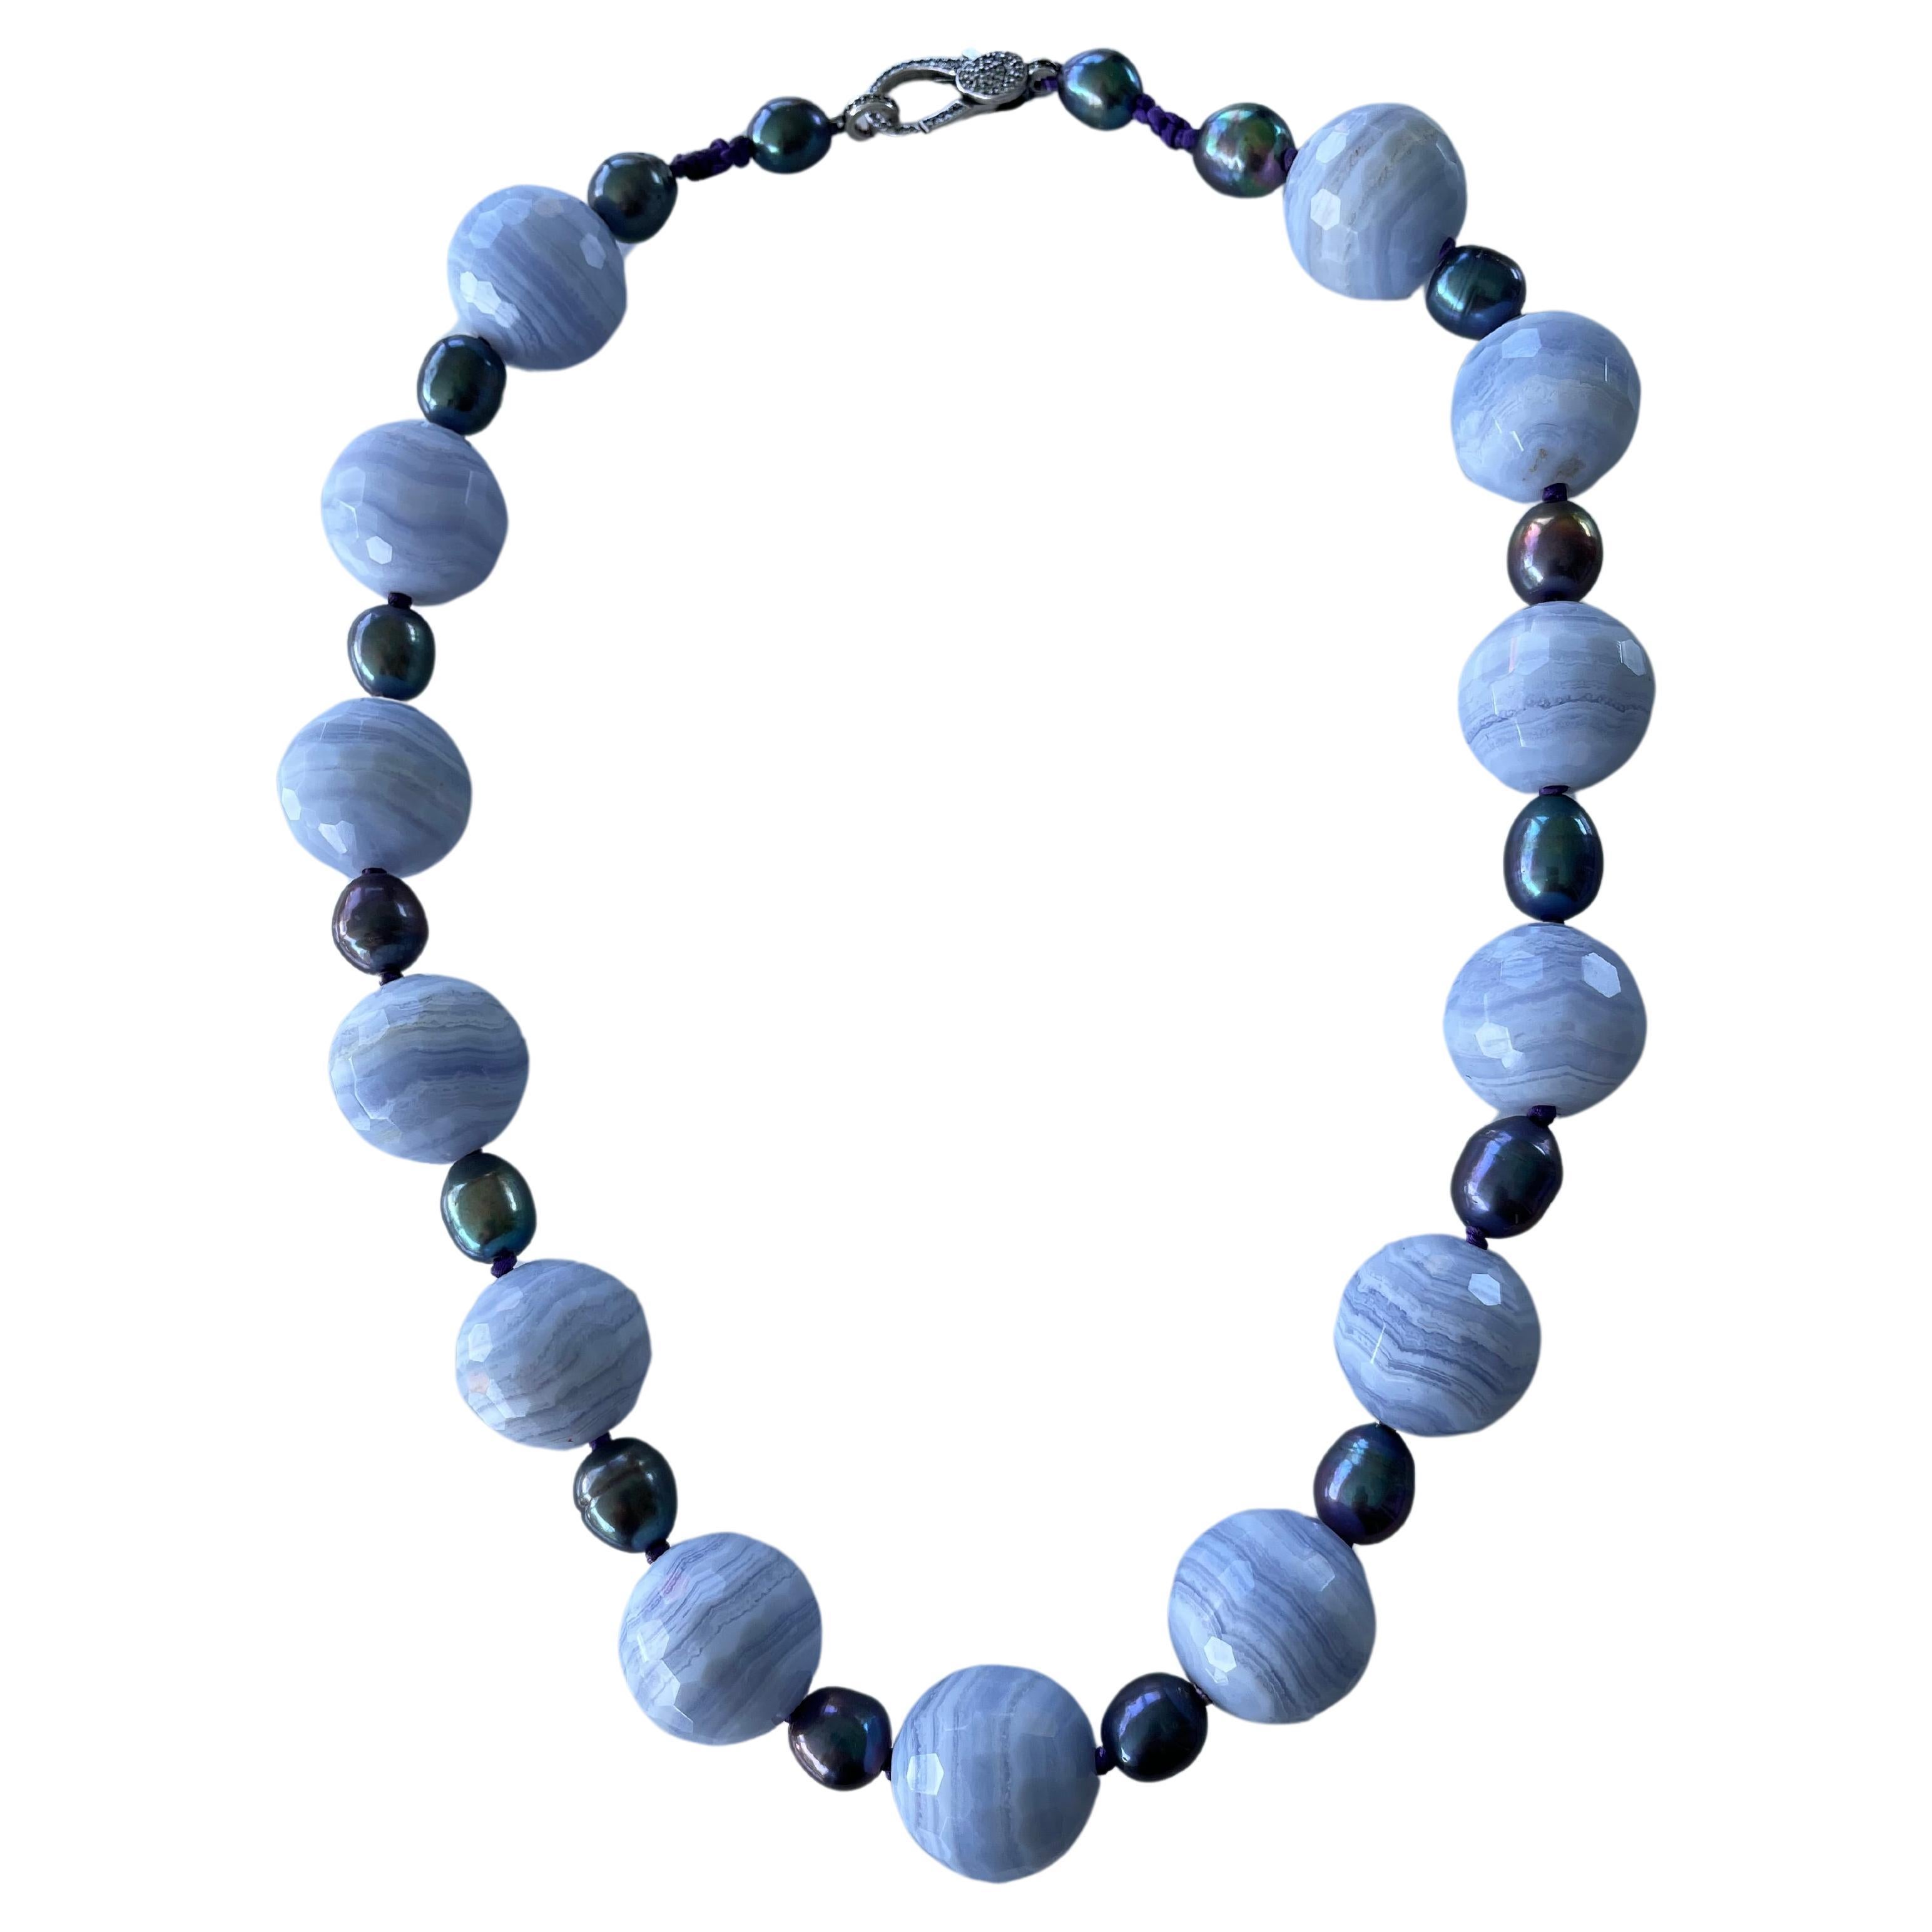 LB Large faceted Blue Lace Agate beads with Peacock freshwater pearls necklace 